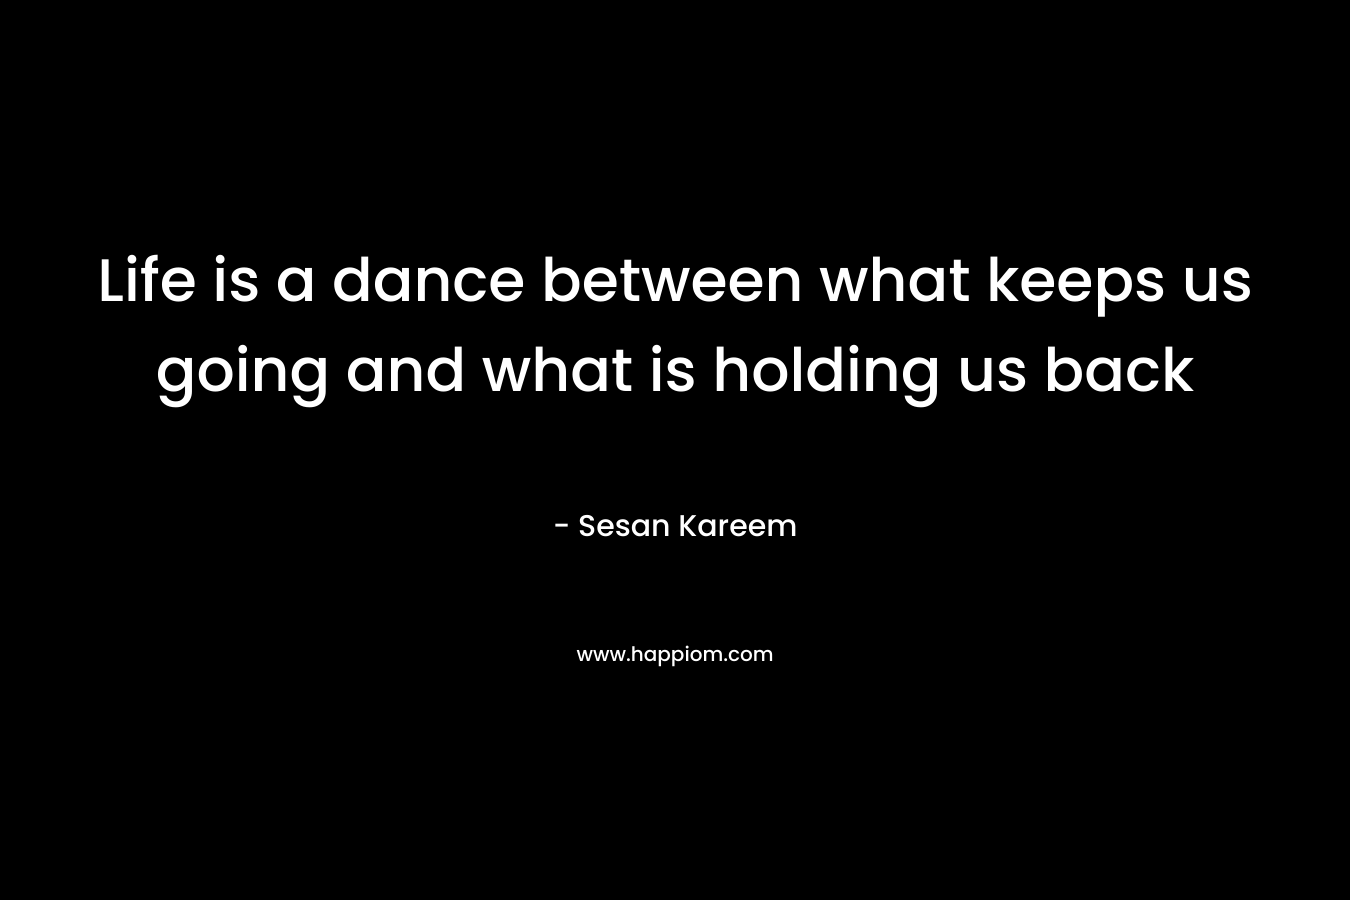 Life is a dance between what keeps us going and what is holding us back – Sesan Kareem